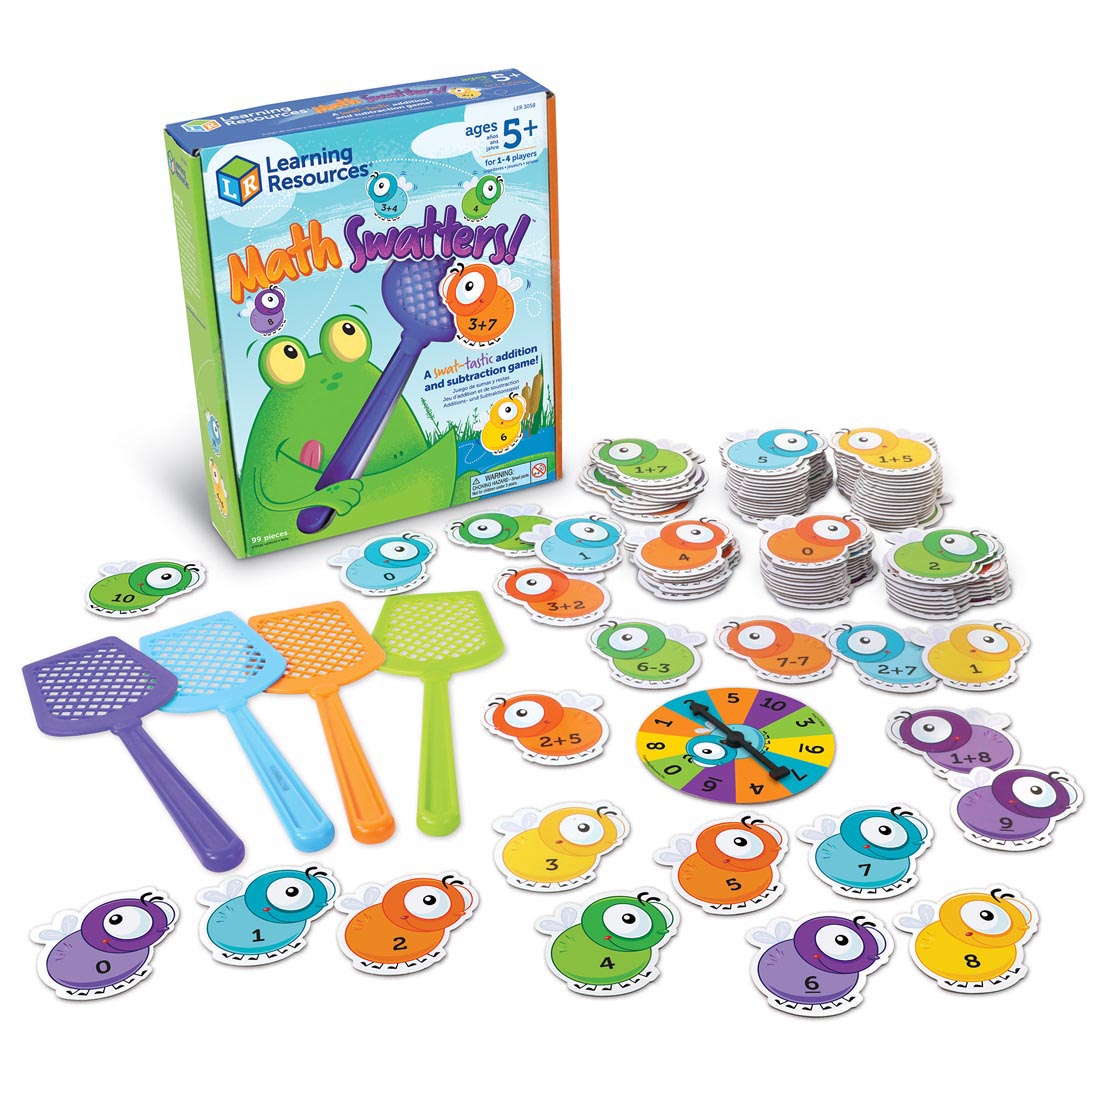 Math Swatters! Addition & Subtraction Game with components shown outside the box